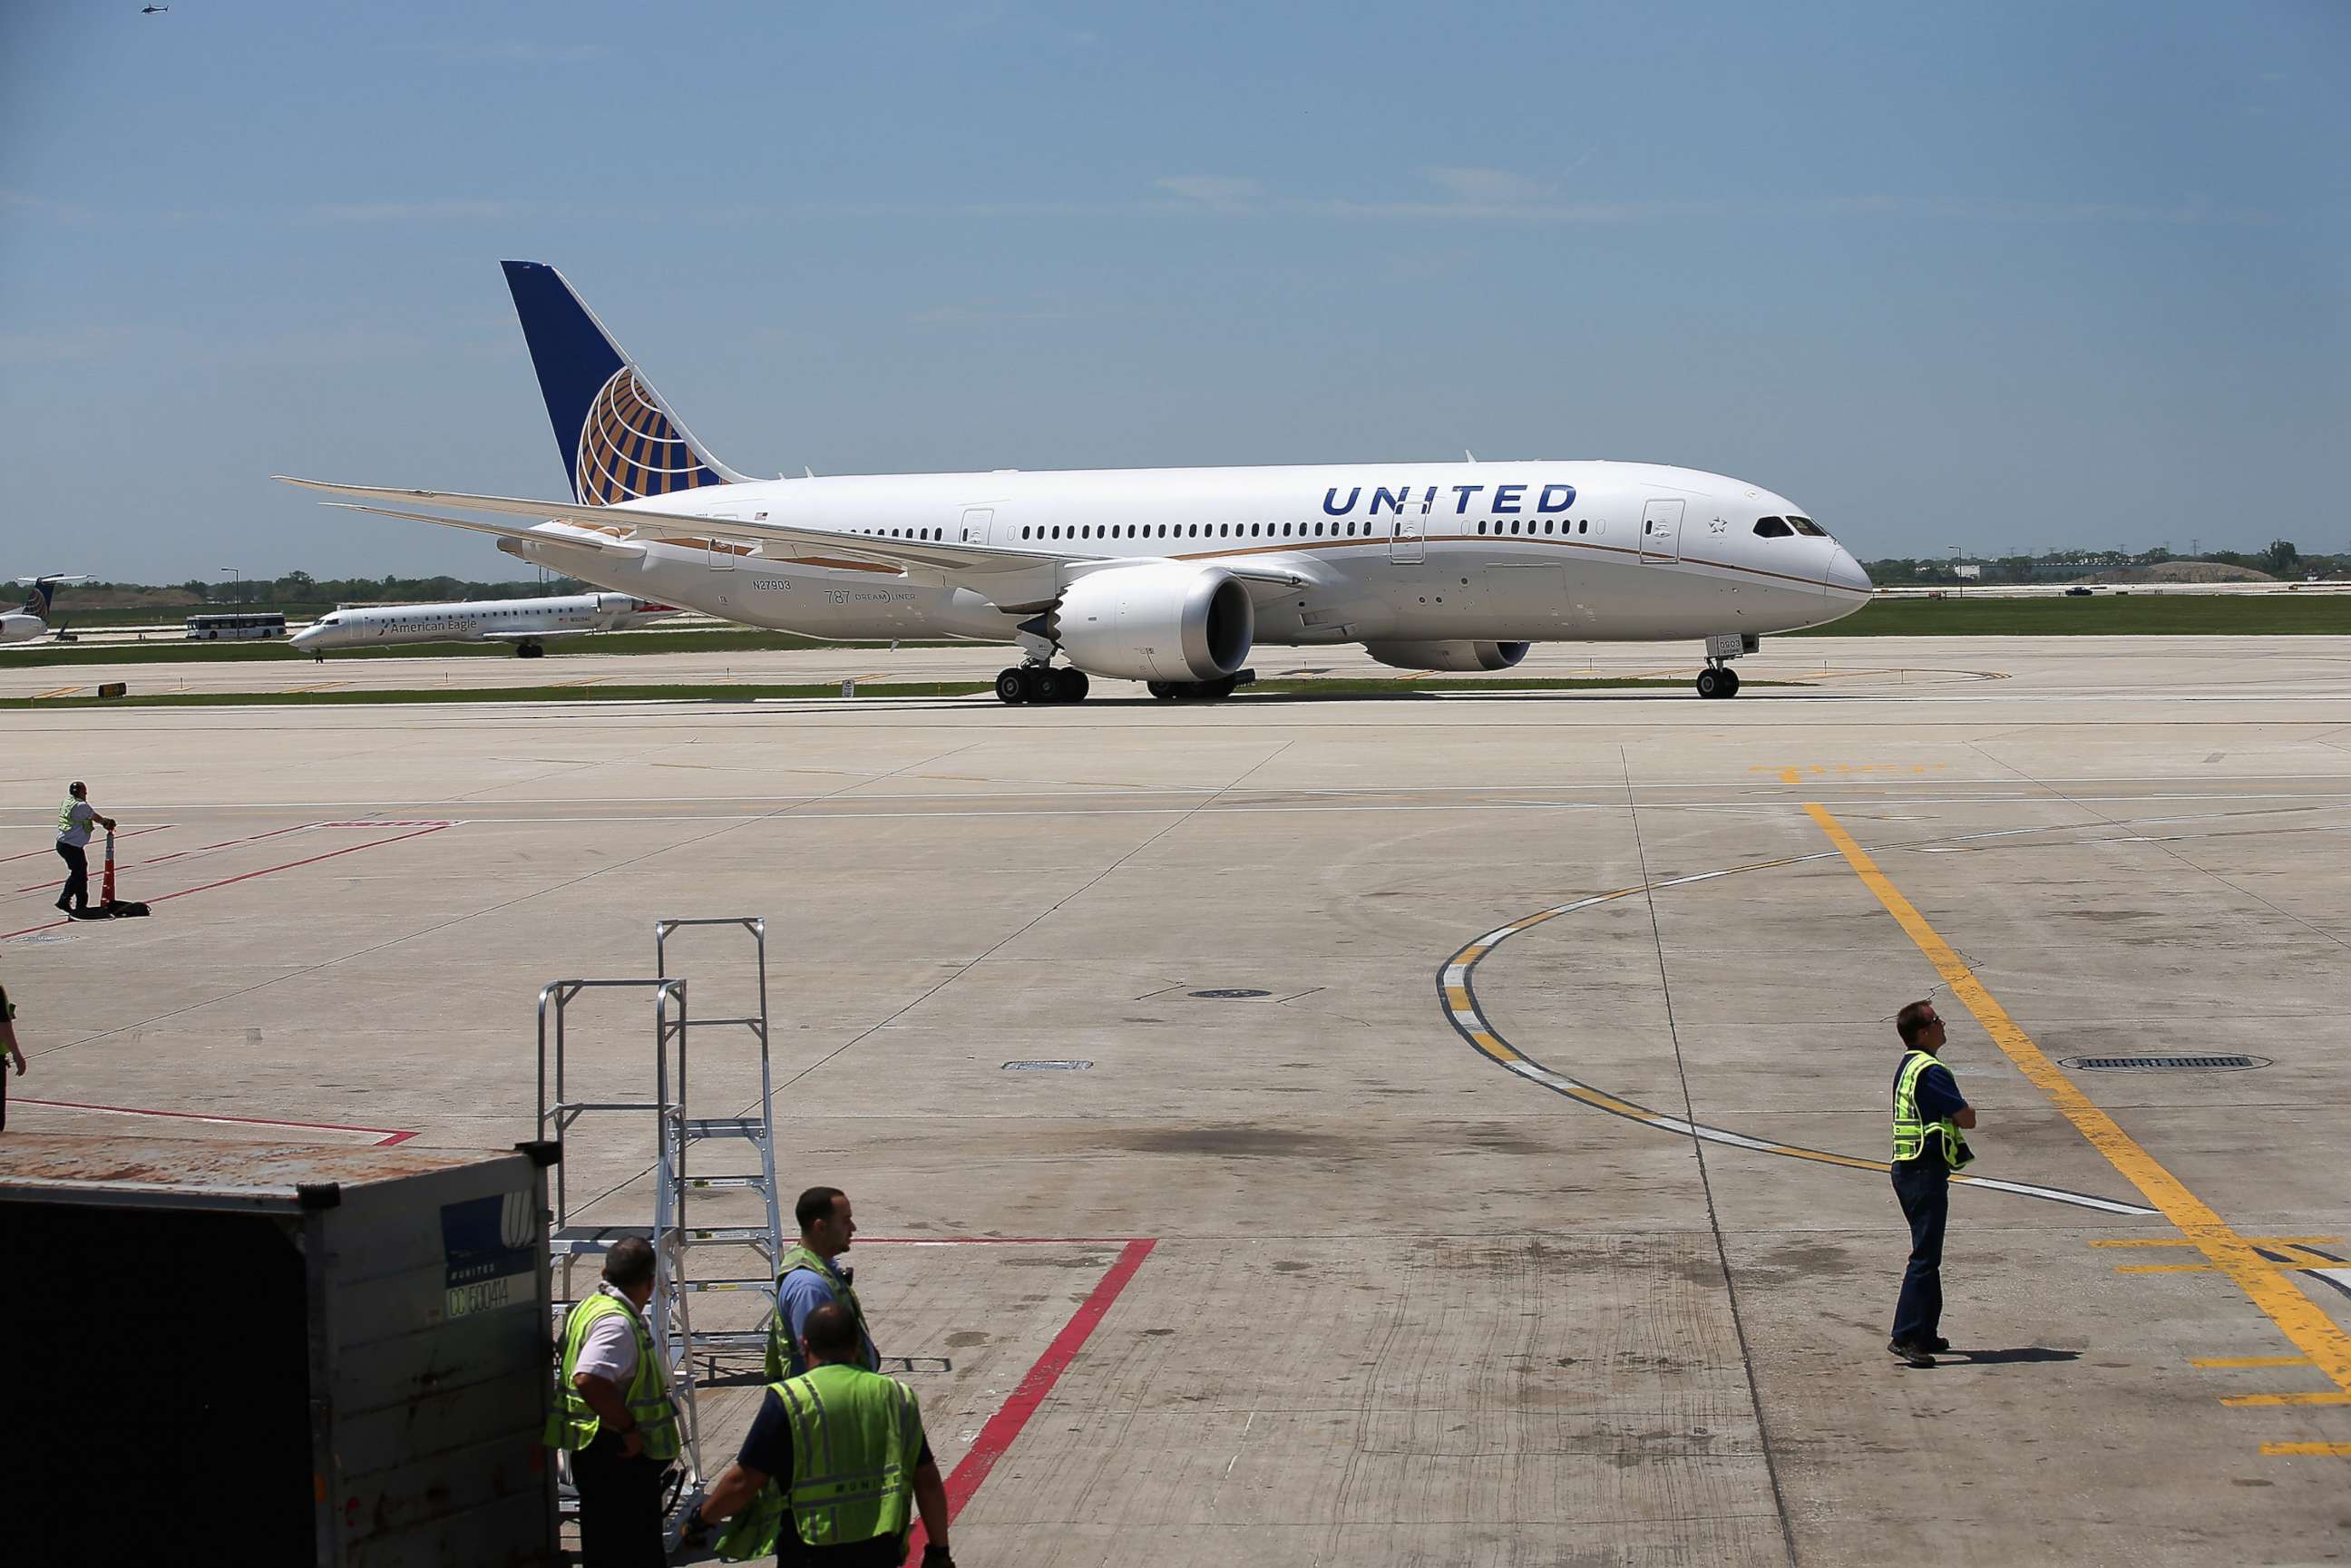 PHOTO: A United Airlines Boeing 787 Dreamliner taxis to a gate at O'Hare International Airport after taking off from Houston, May 20, 2013 in Chicago.